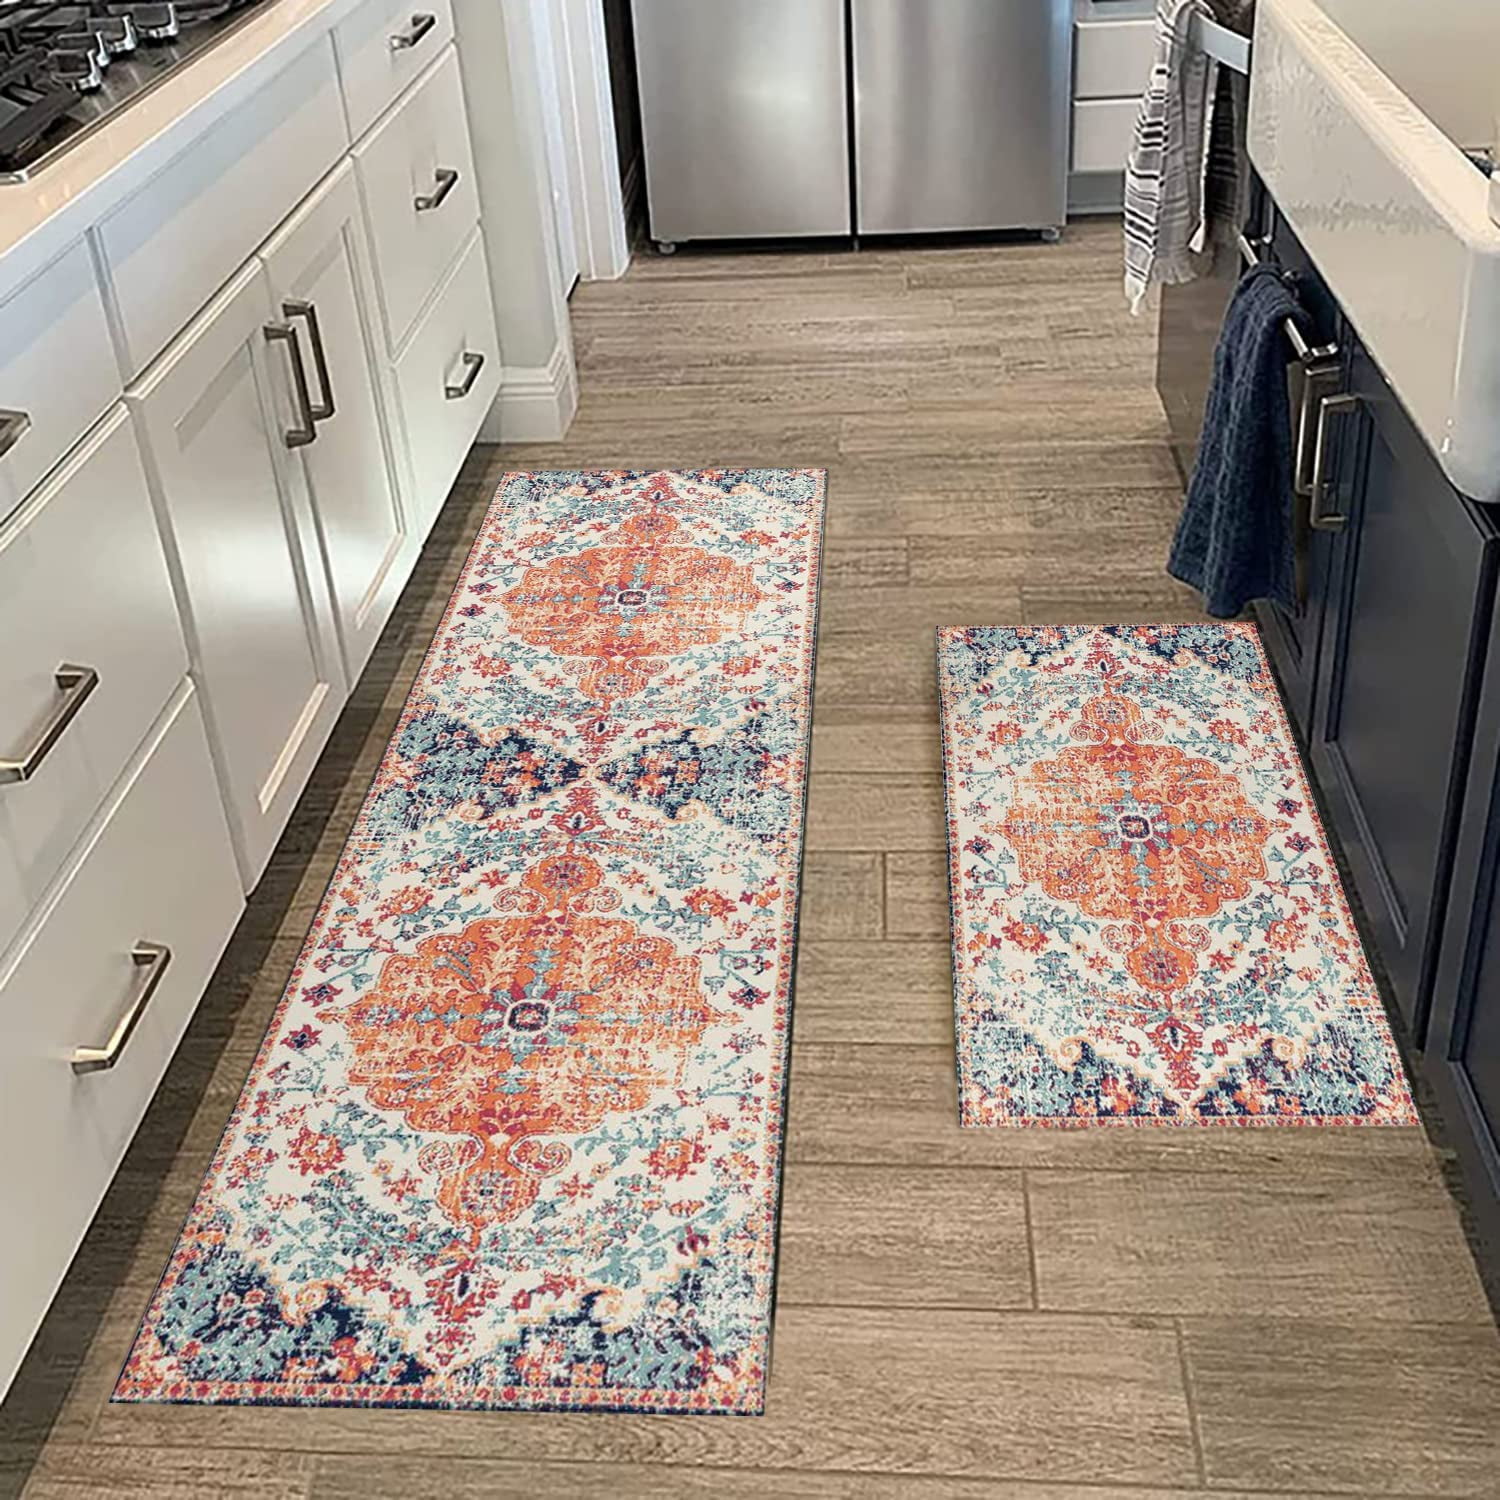 GAMUKAI Kitchen Rugs and Mats Set of 2 Non-Skid Natural Rubber Kitchen Mats  for Floor Runner Rugs for Kitchen Floor Front of Sink, Hallway, Laundry